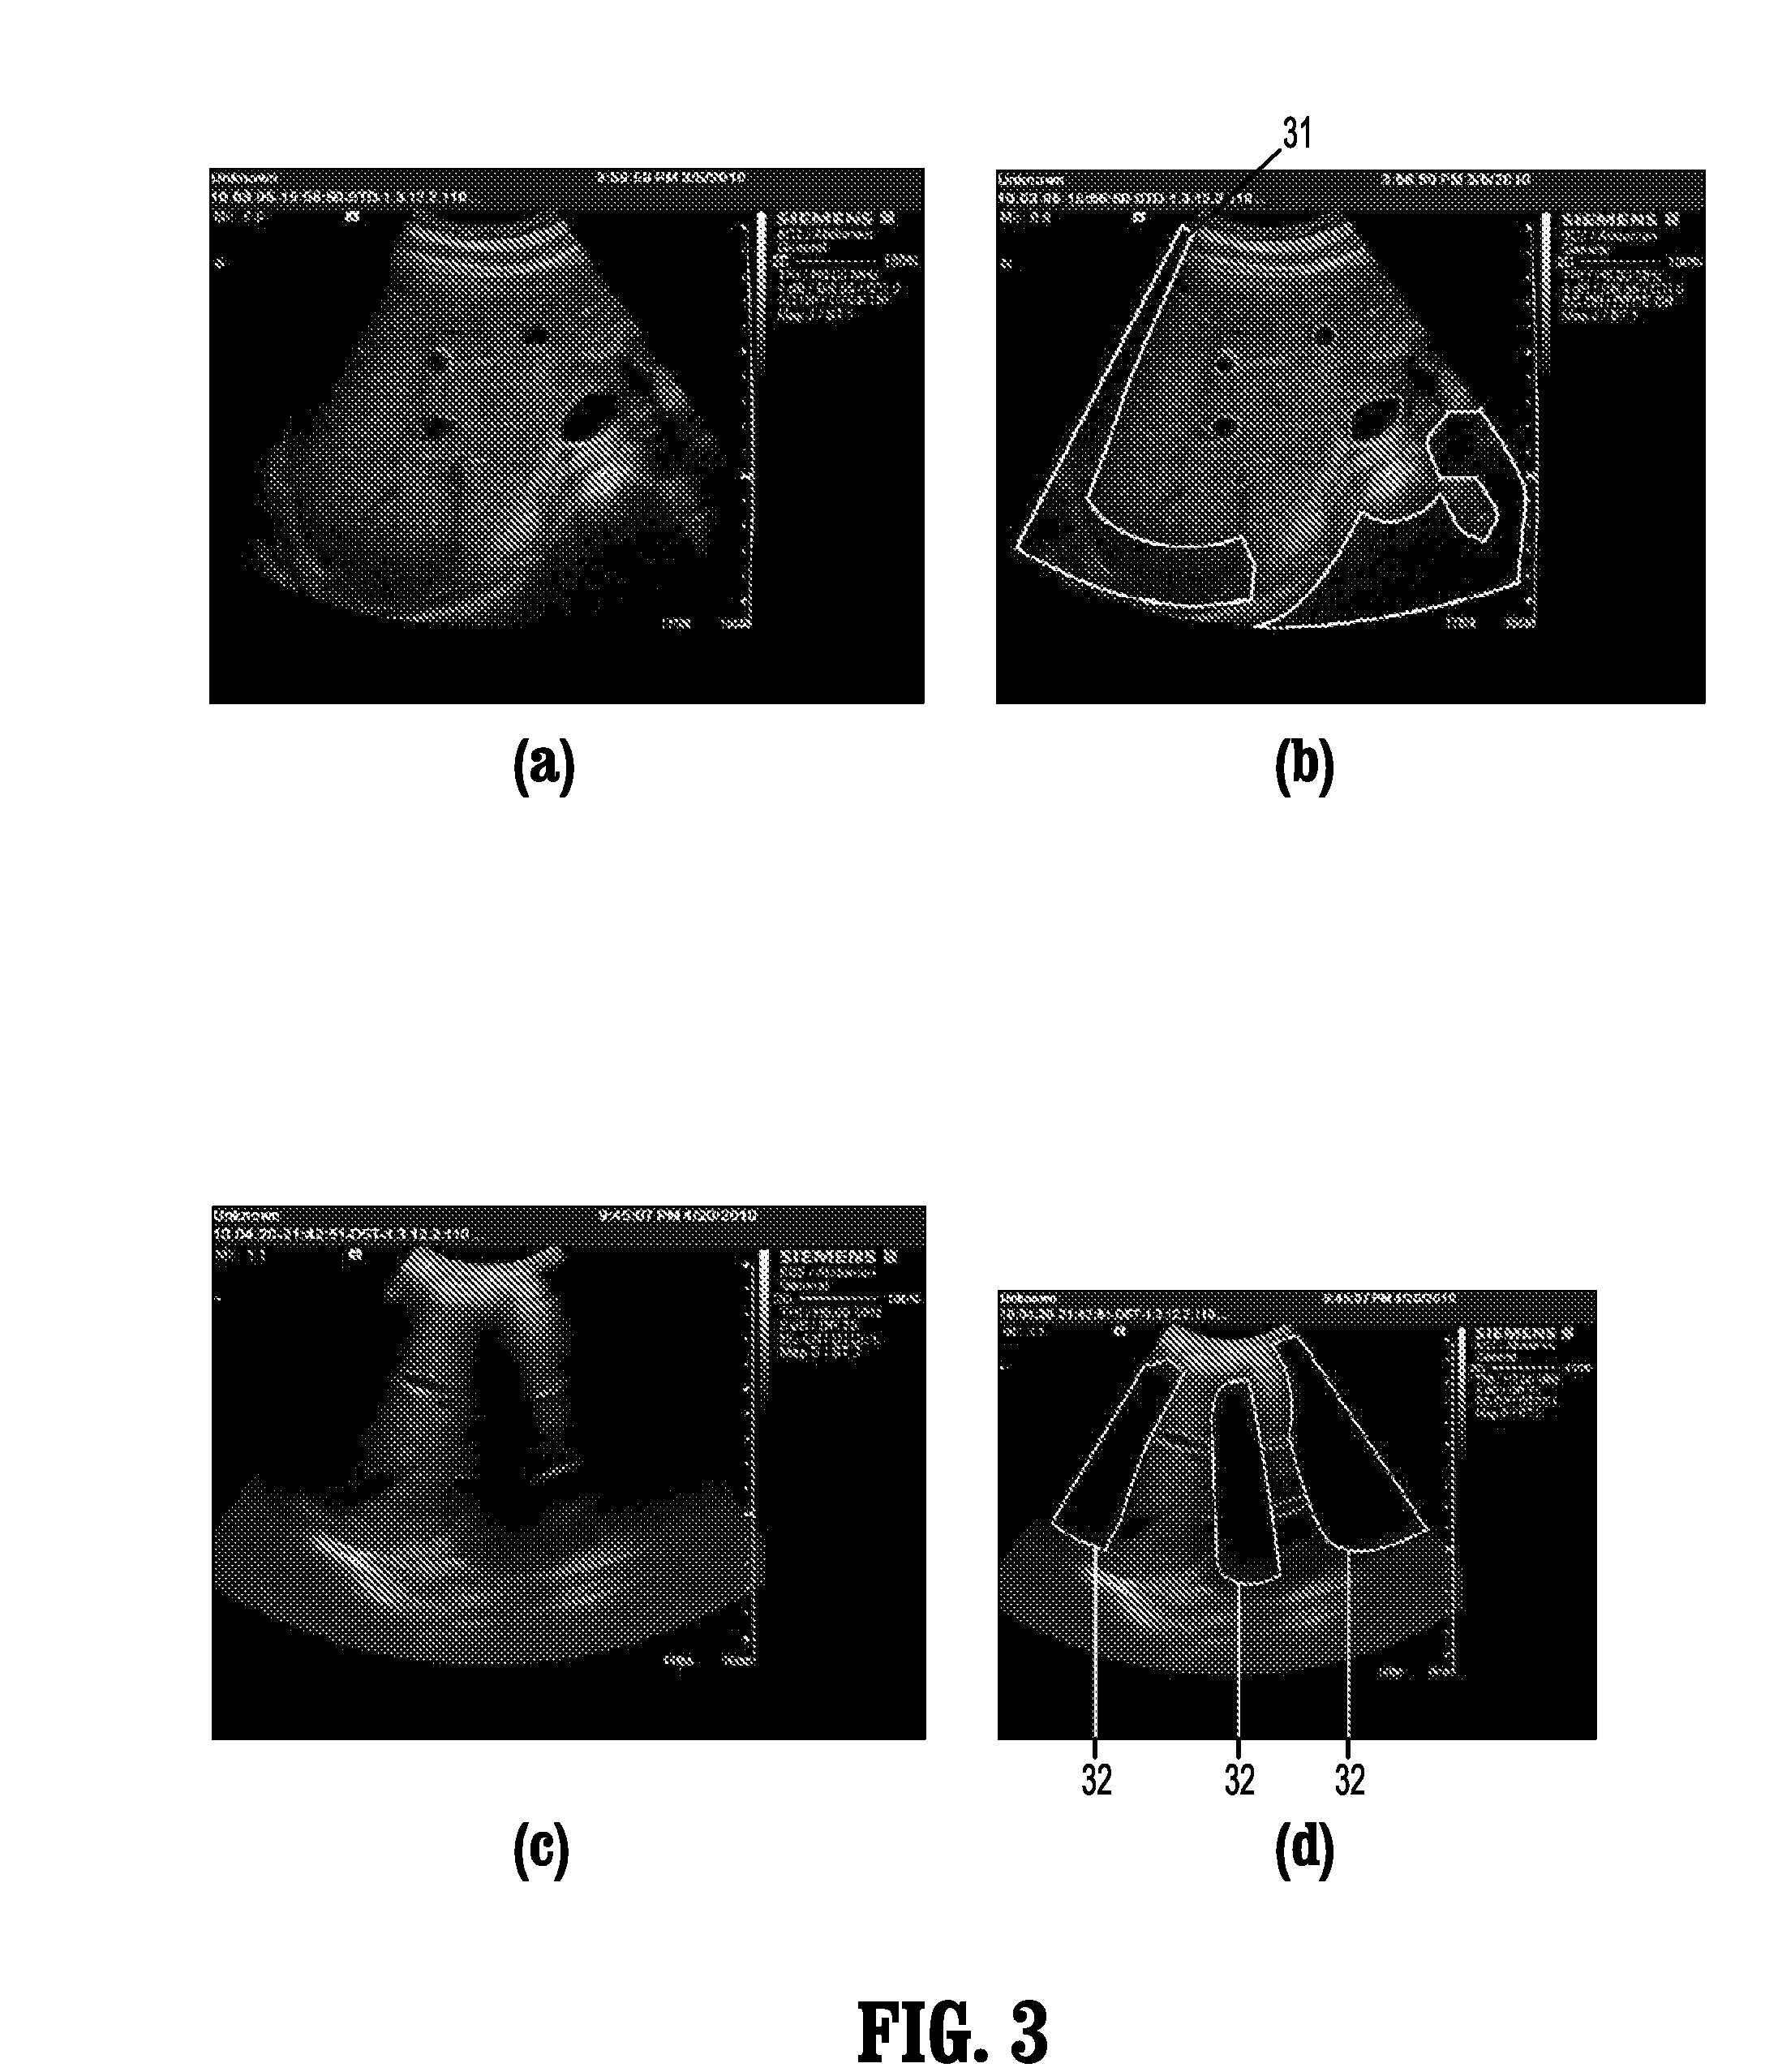 System and method for detection of acoustic shadows and automatic assessment of image usability in 3D ultrasound images